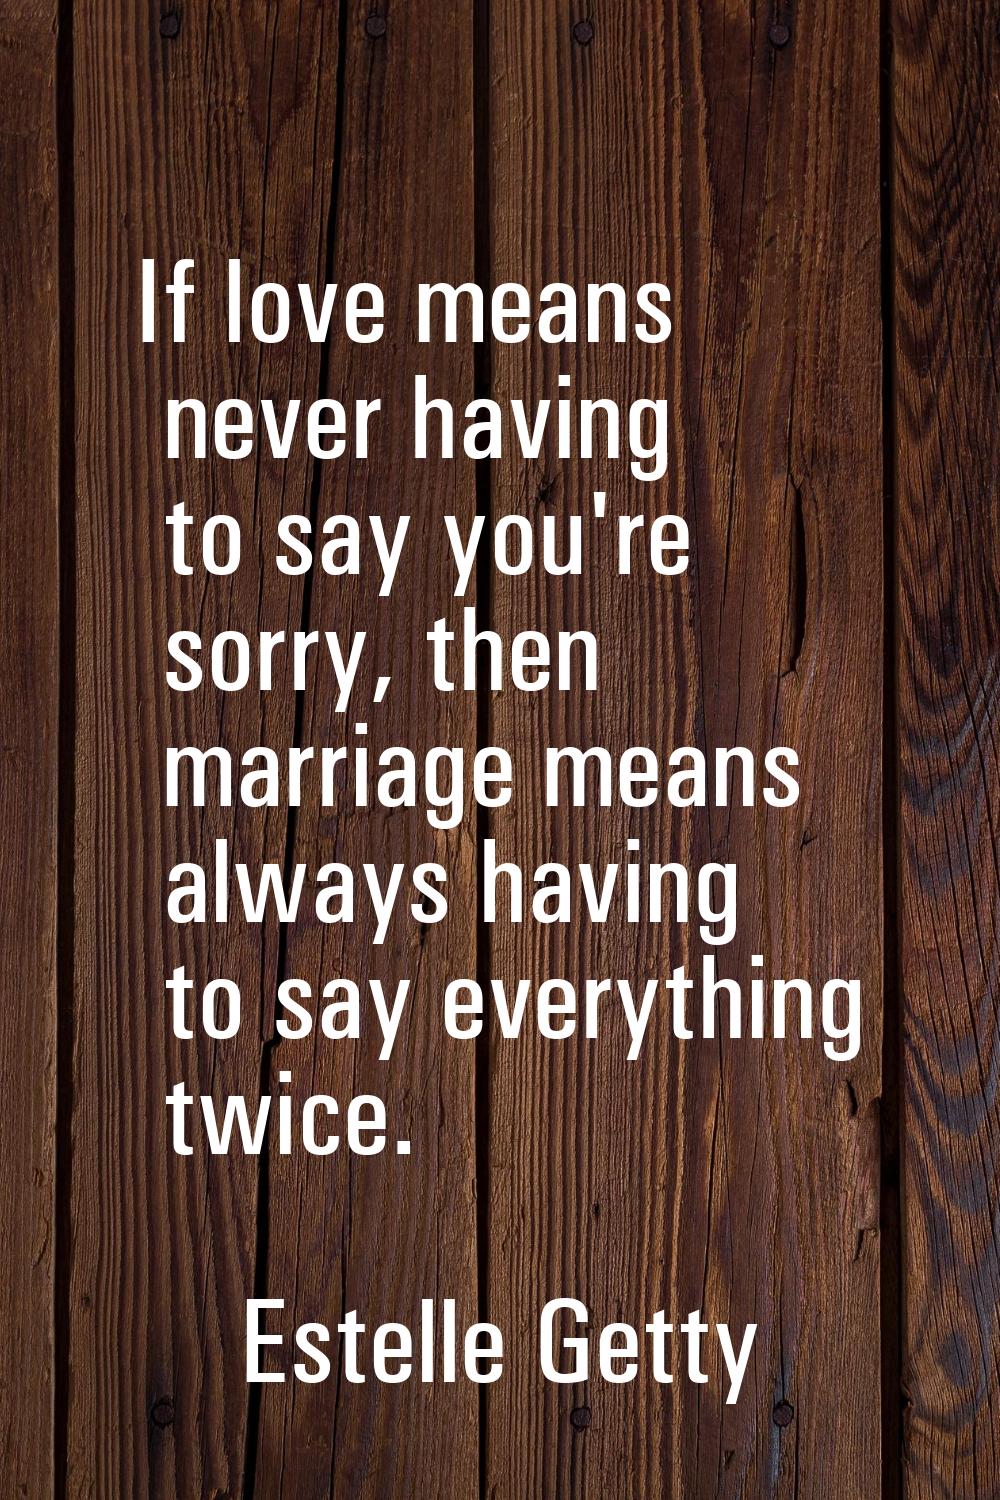 If love means never having to say you're sorry, then marriage means always having to say everything